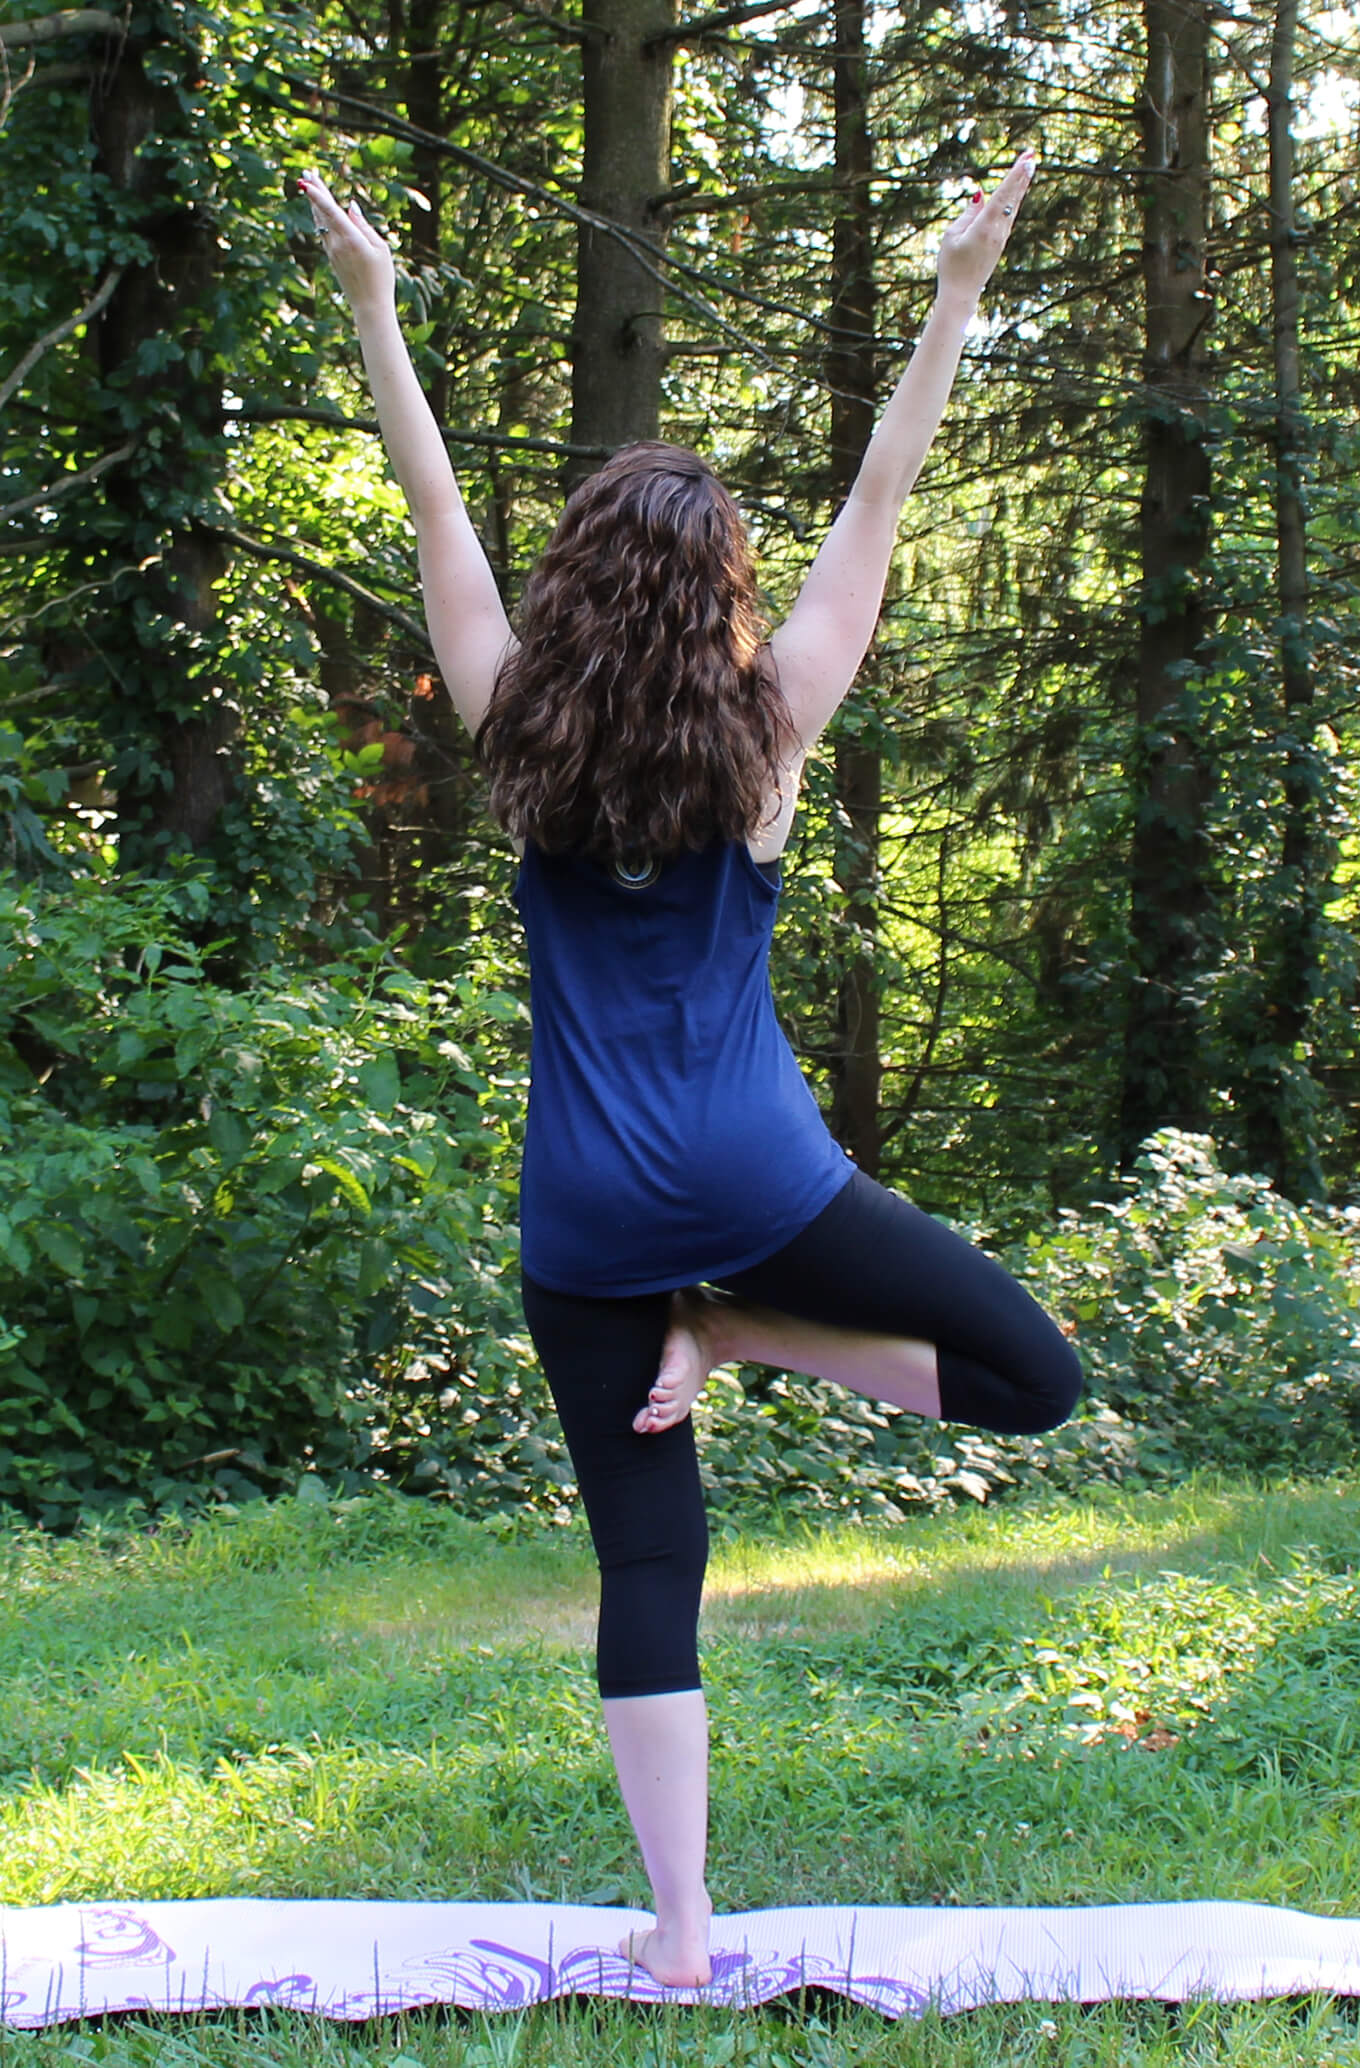 Donna demonstrating a tree yoga pose while outside